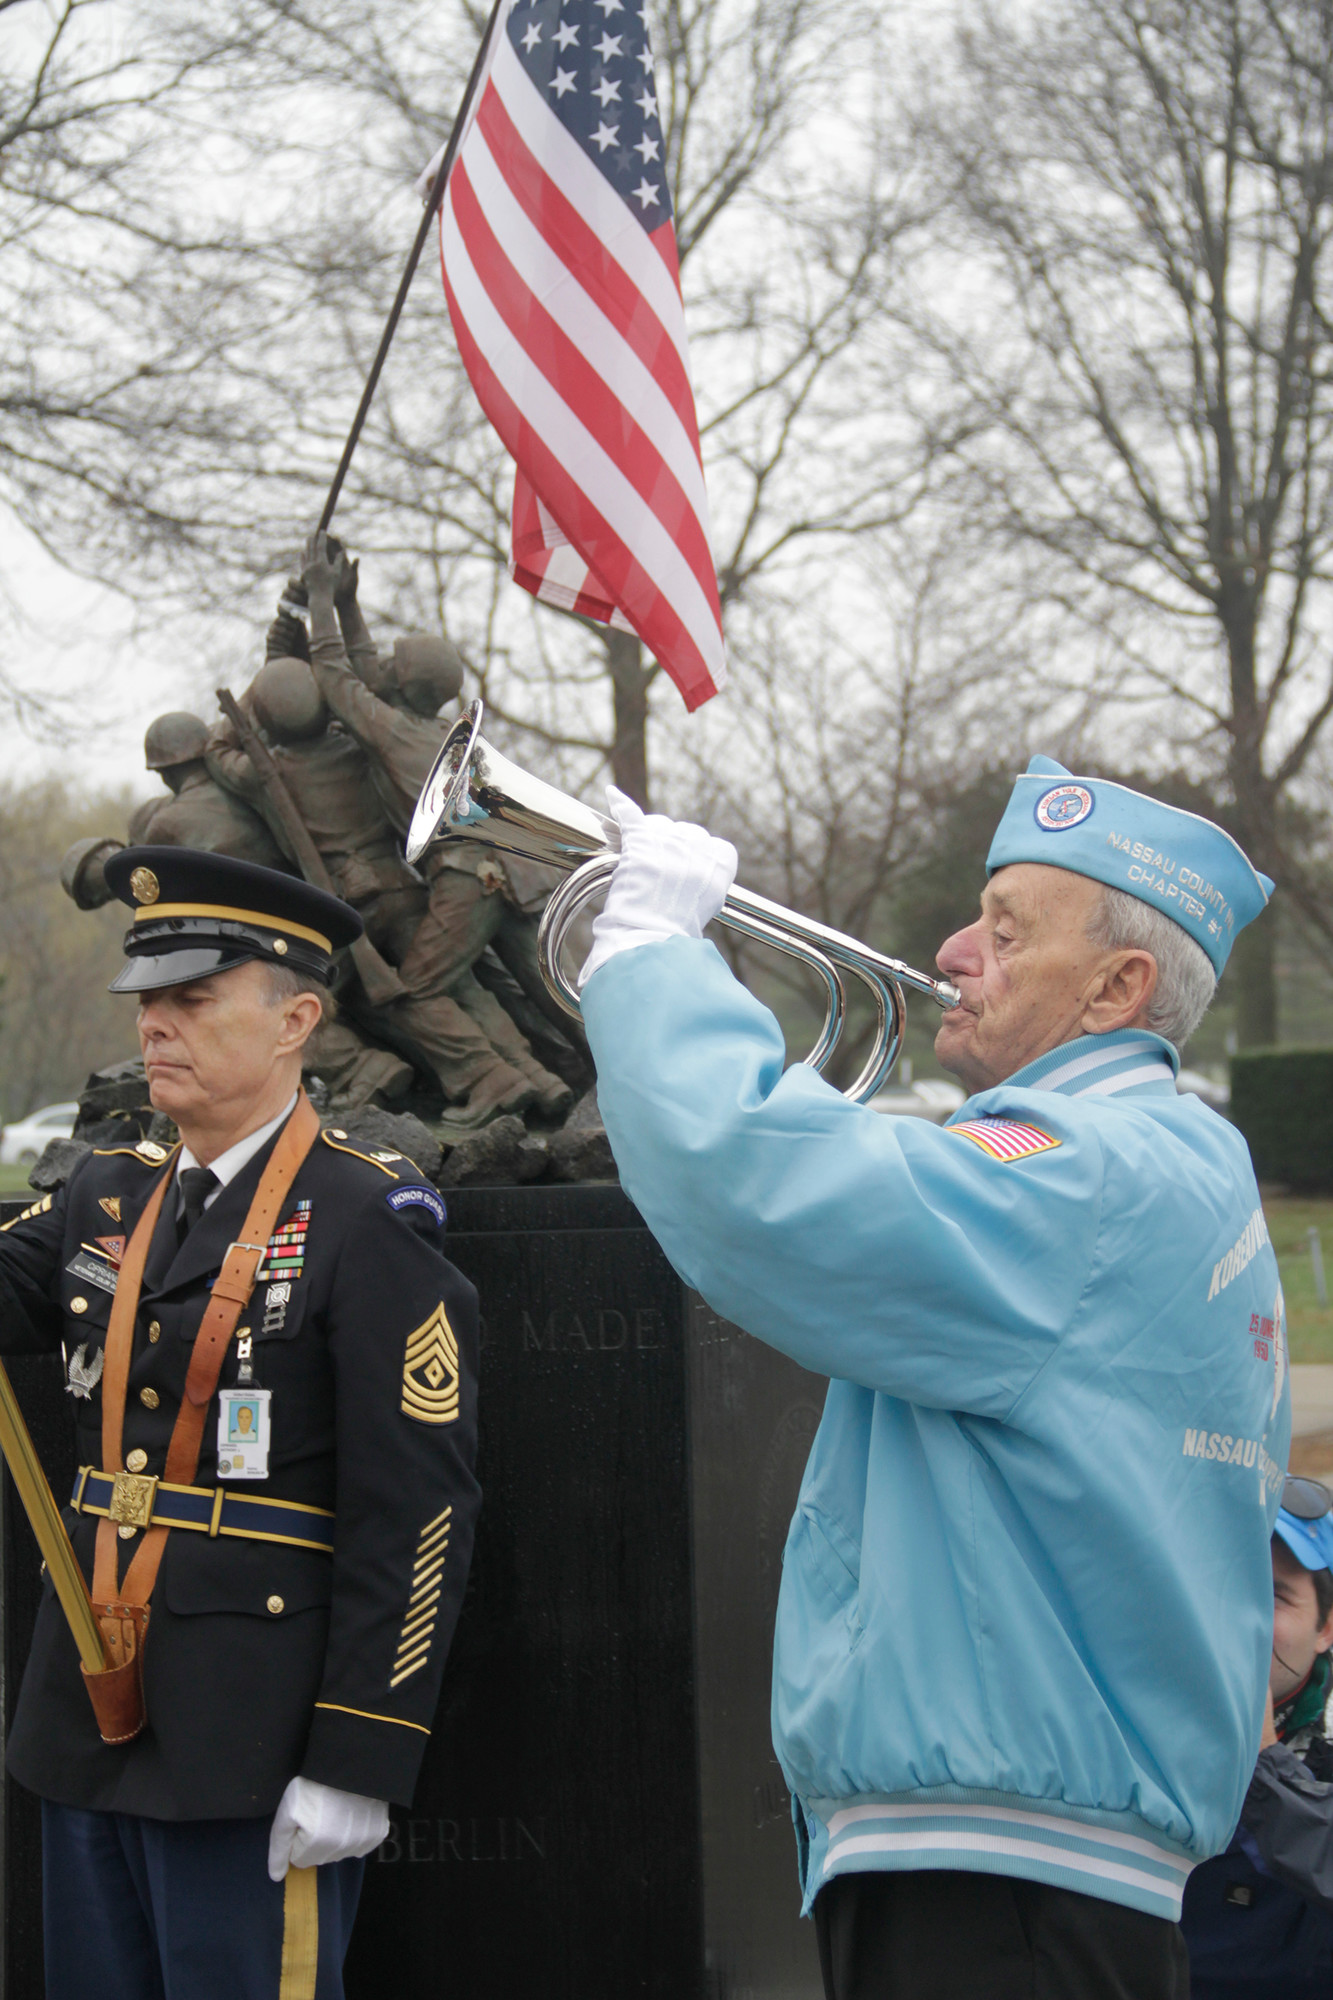 Buddy Epstein played taps while Tony Ciprian of the Veterans’ Color Guard stood at attention.